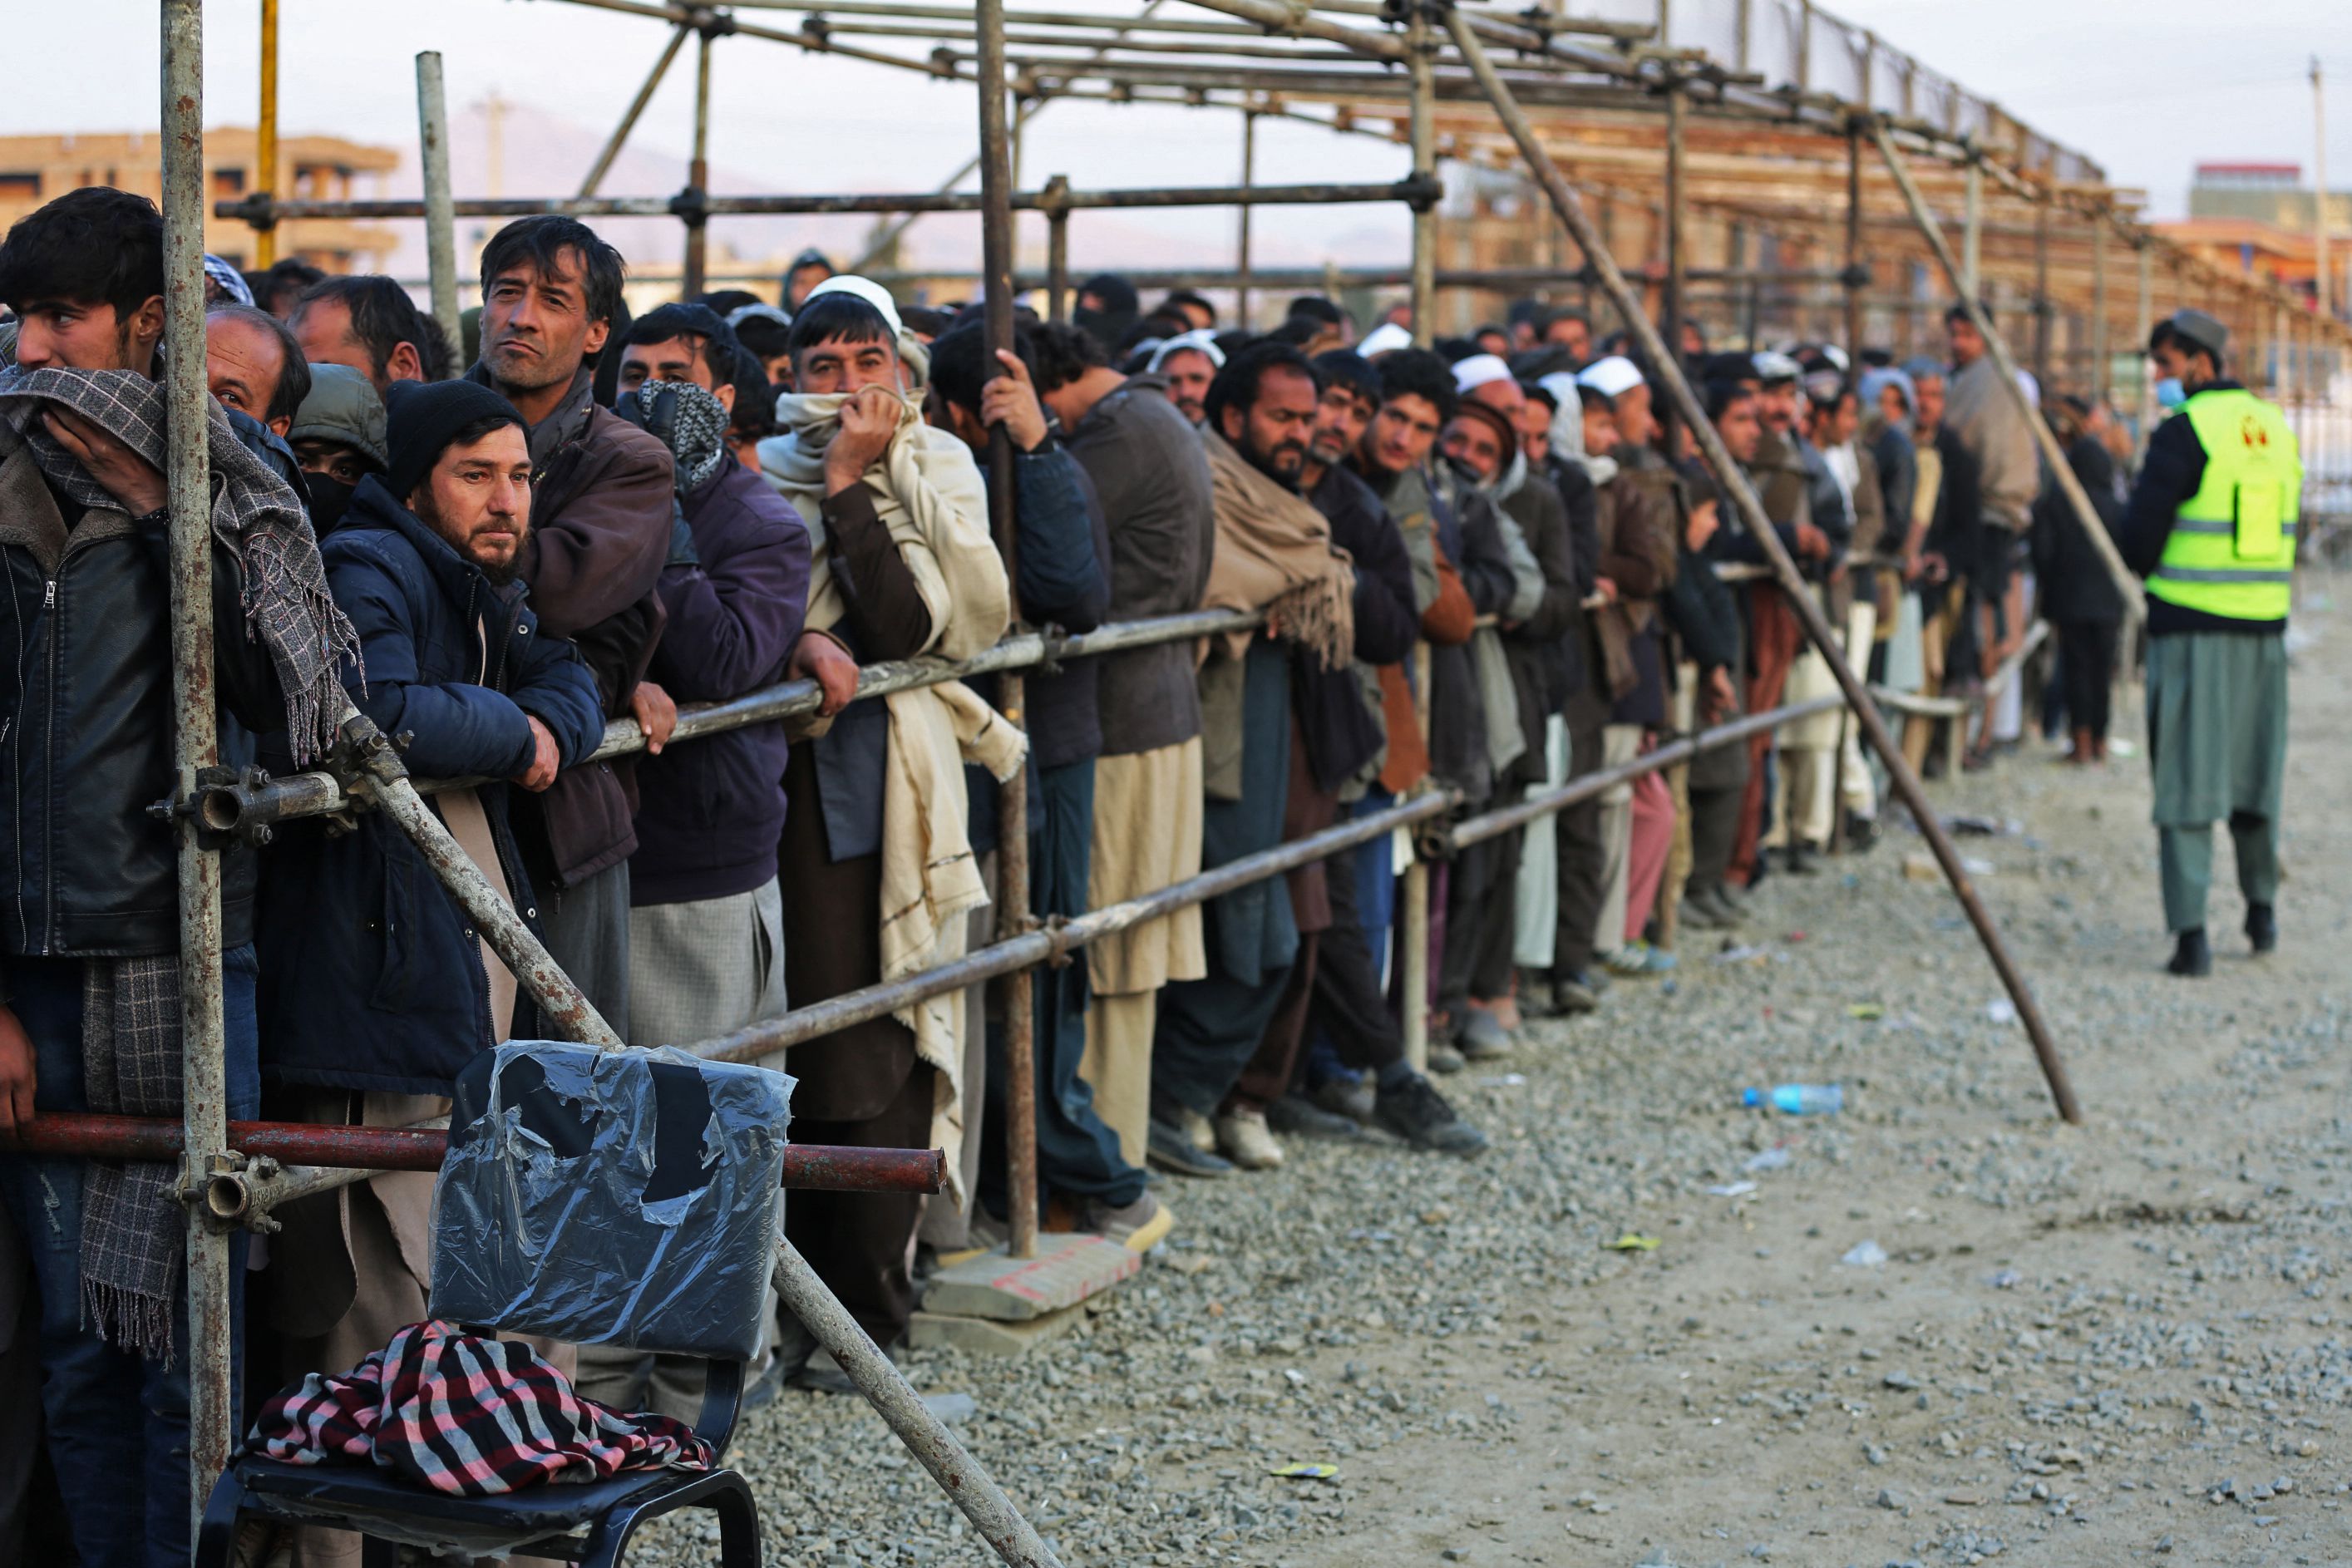 Afghan men stand in queues to receive food aid in Kabul on 25 December